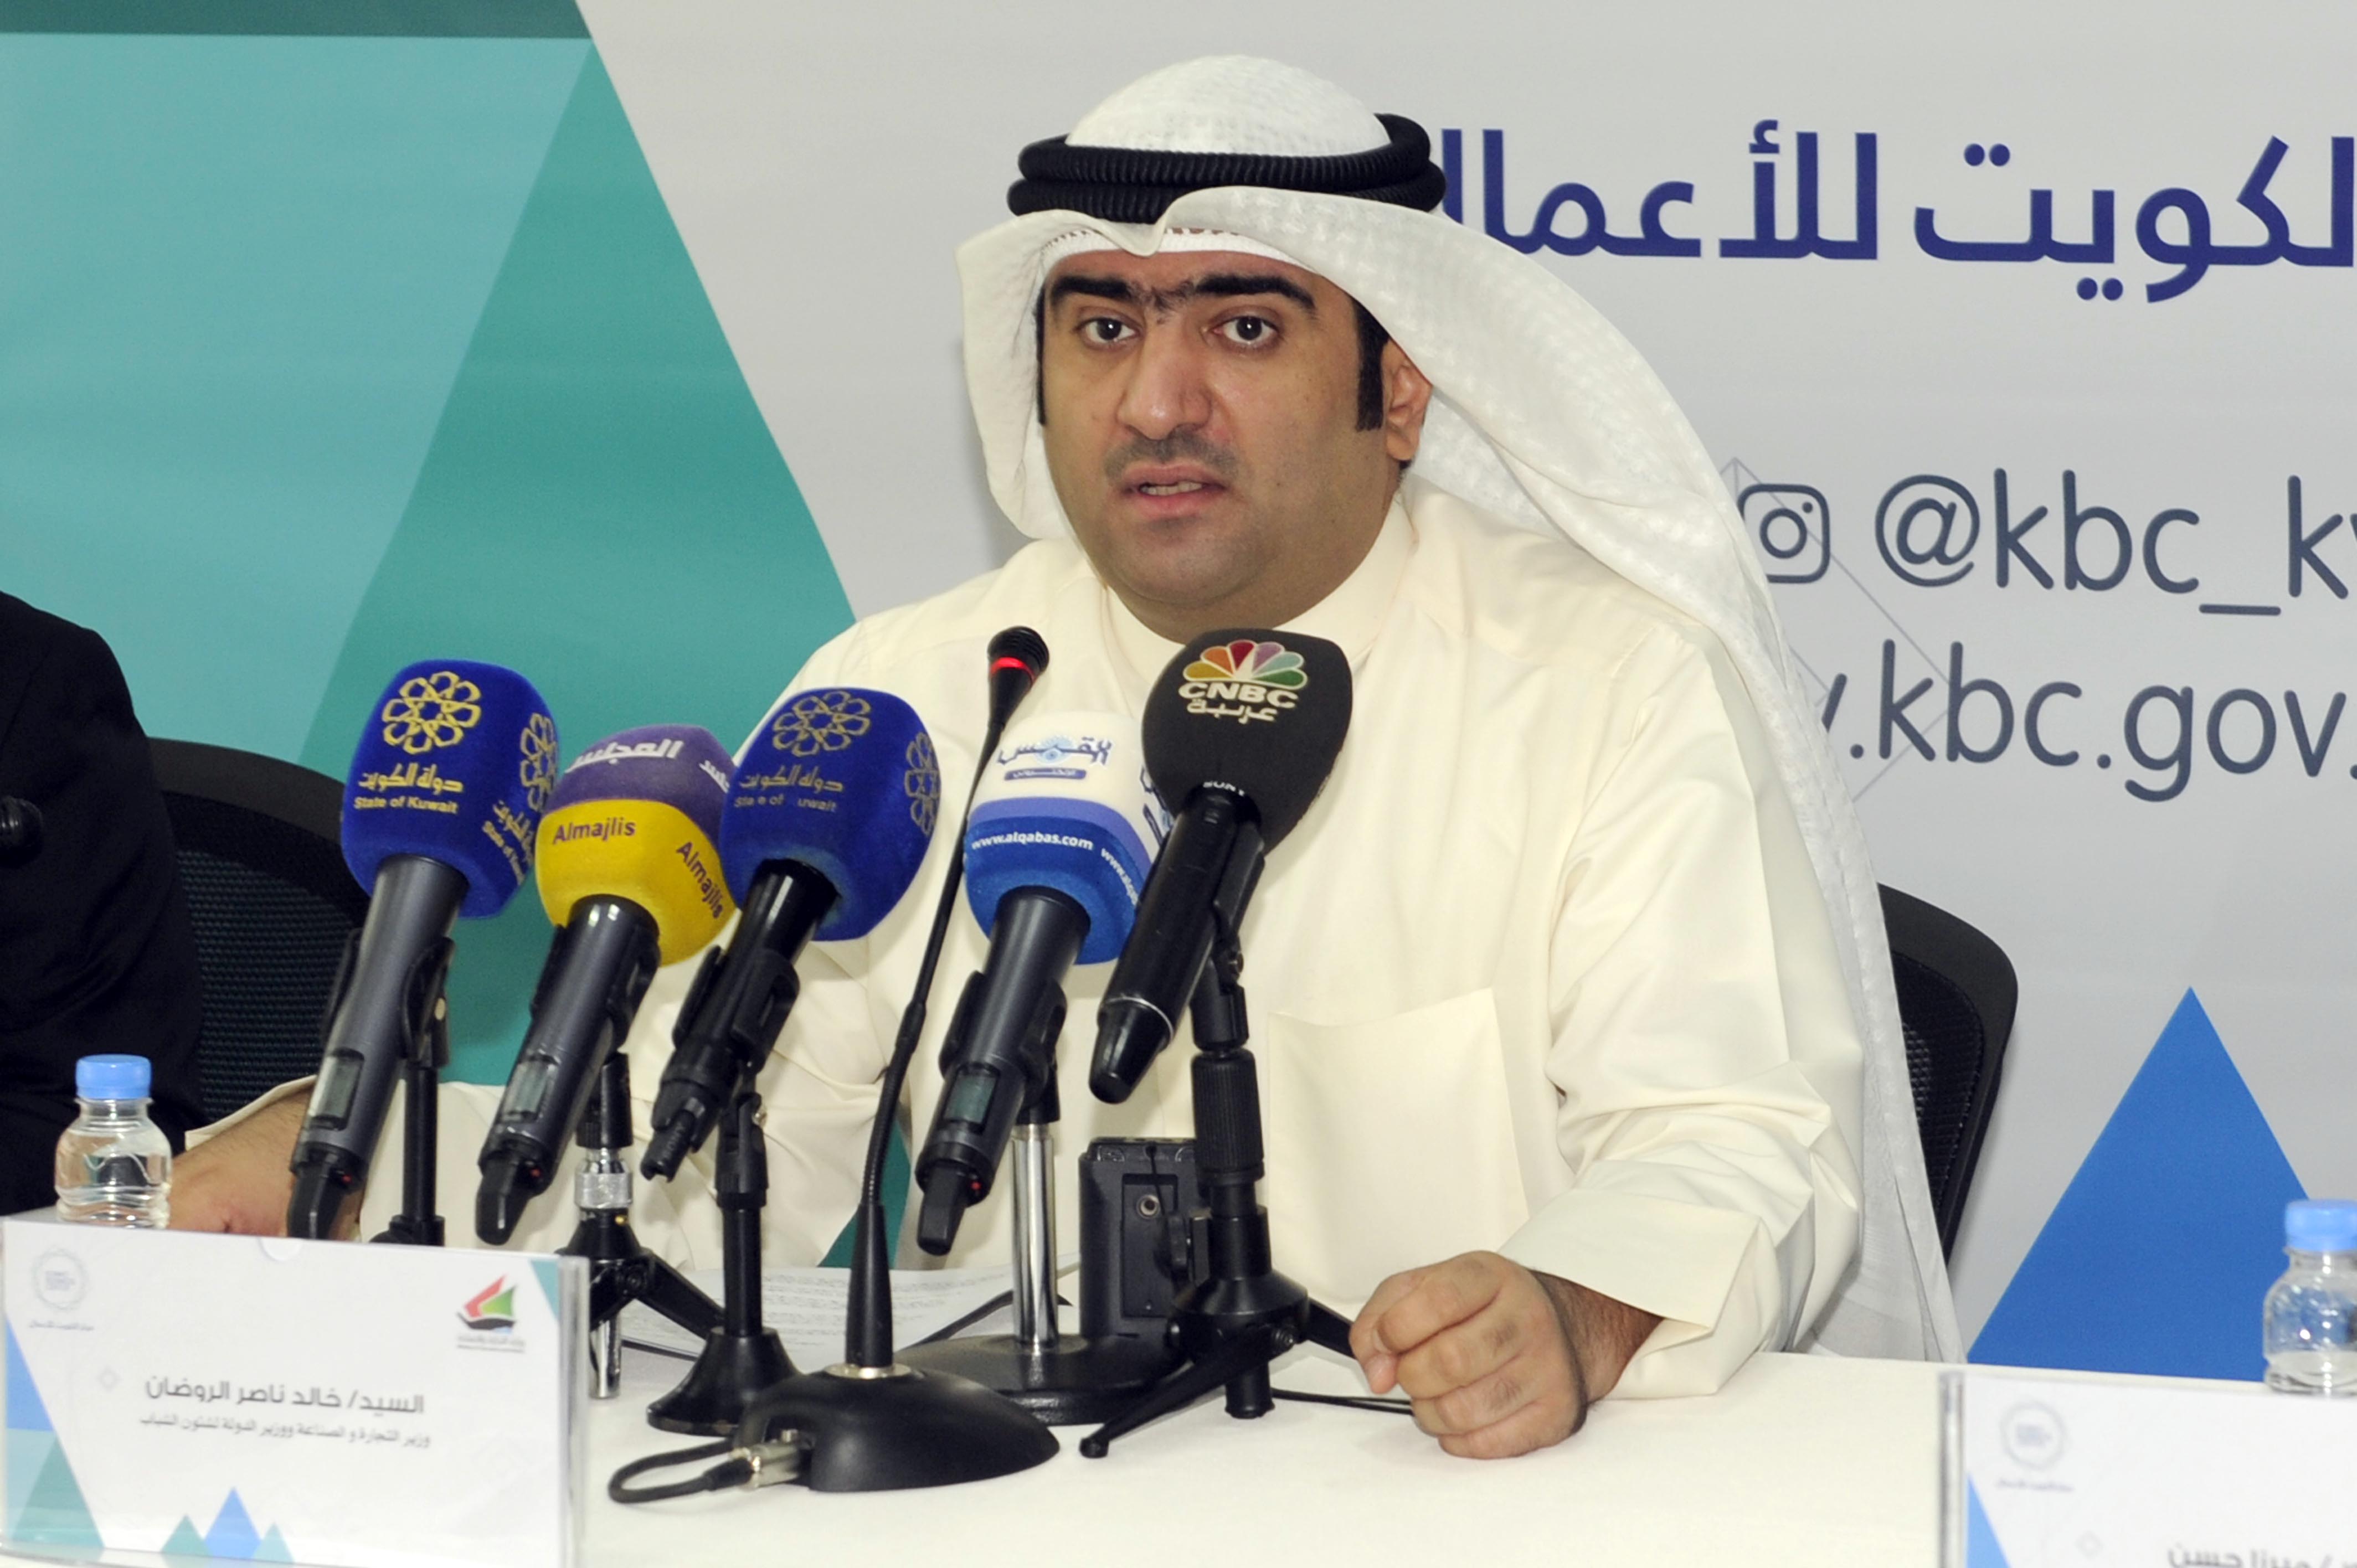 Kuwaiti Minister of Commerce and Industry Khaled Al-Roudhan